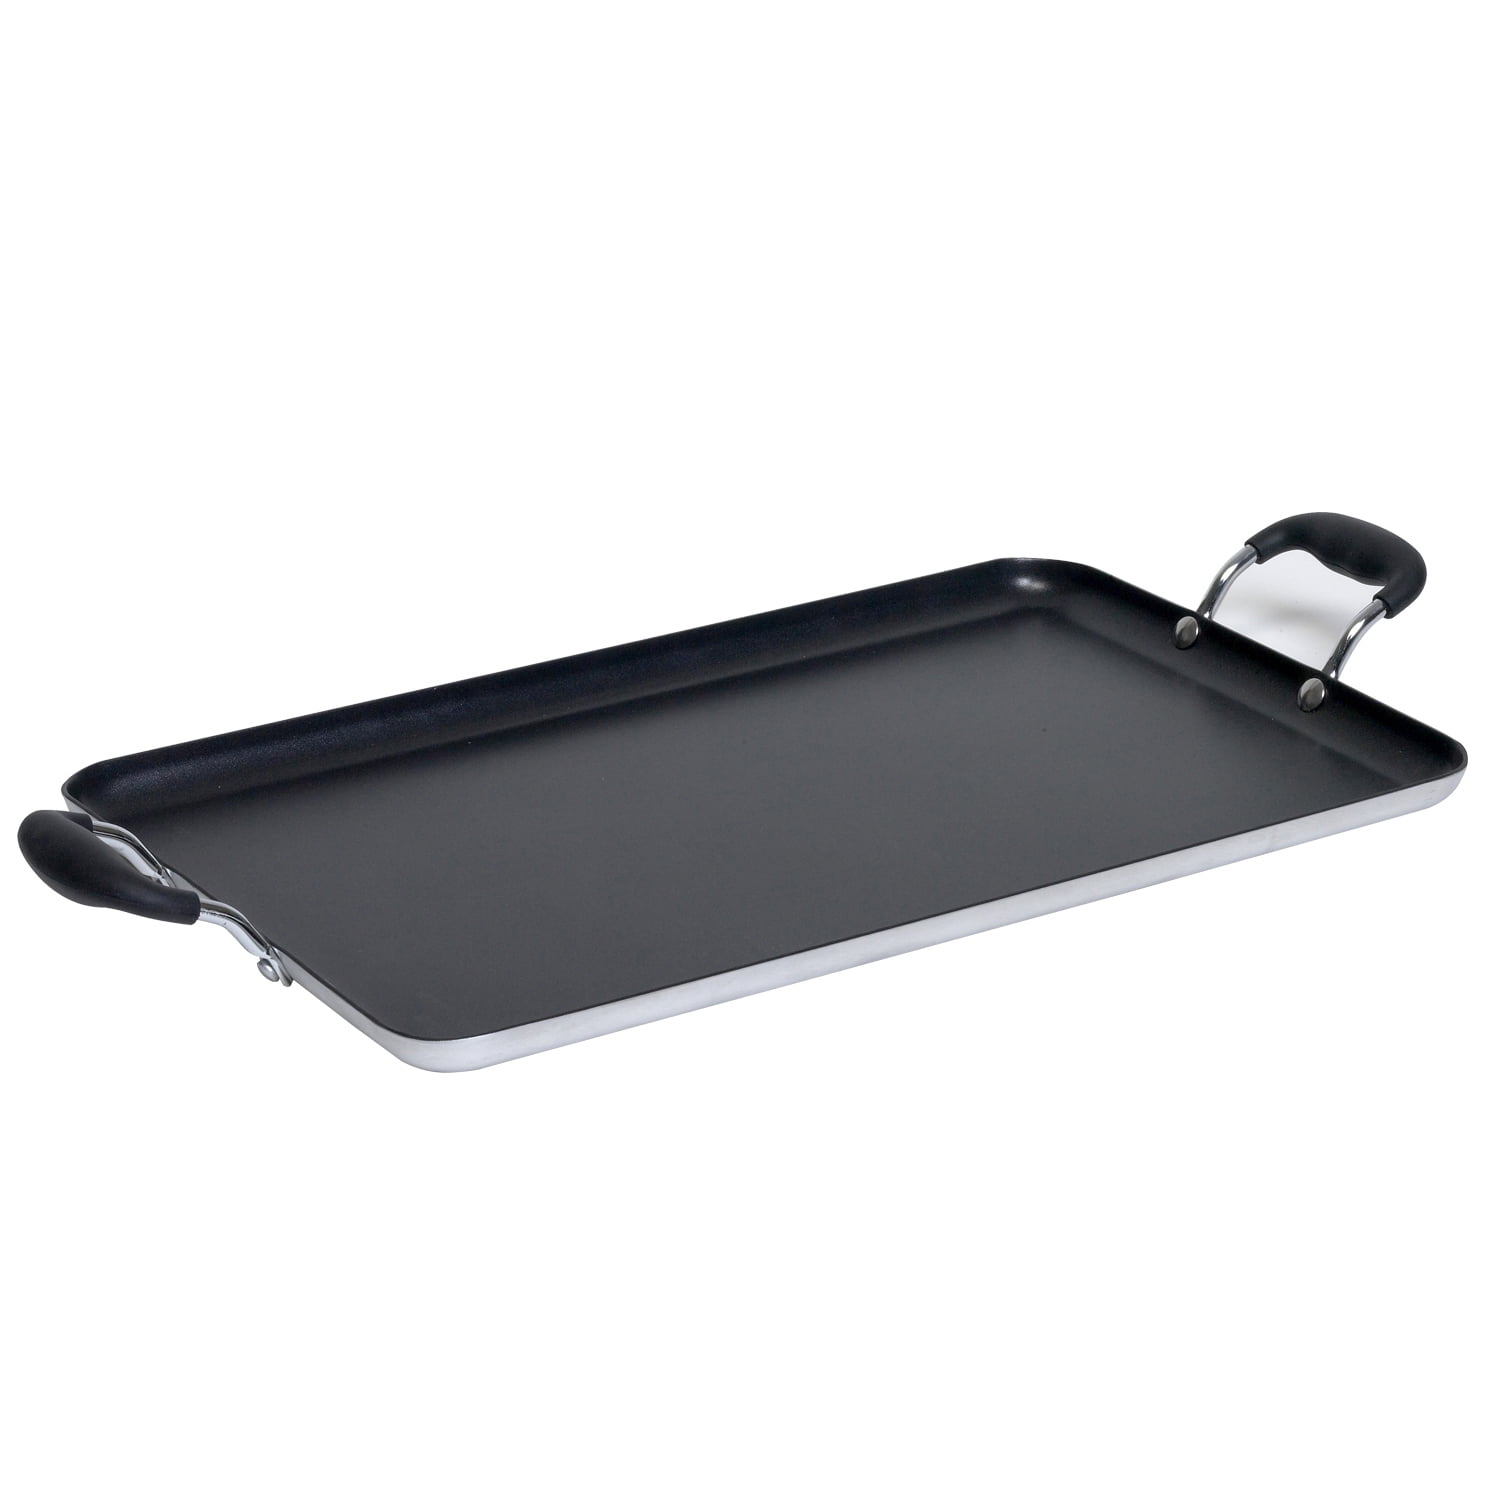 Double Burner Non-Stick Griddle Comal Healthy Cooking Handle Home 17 Inch Black 